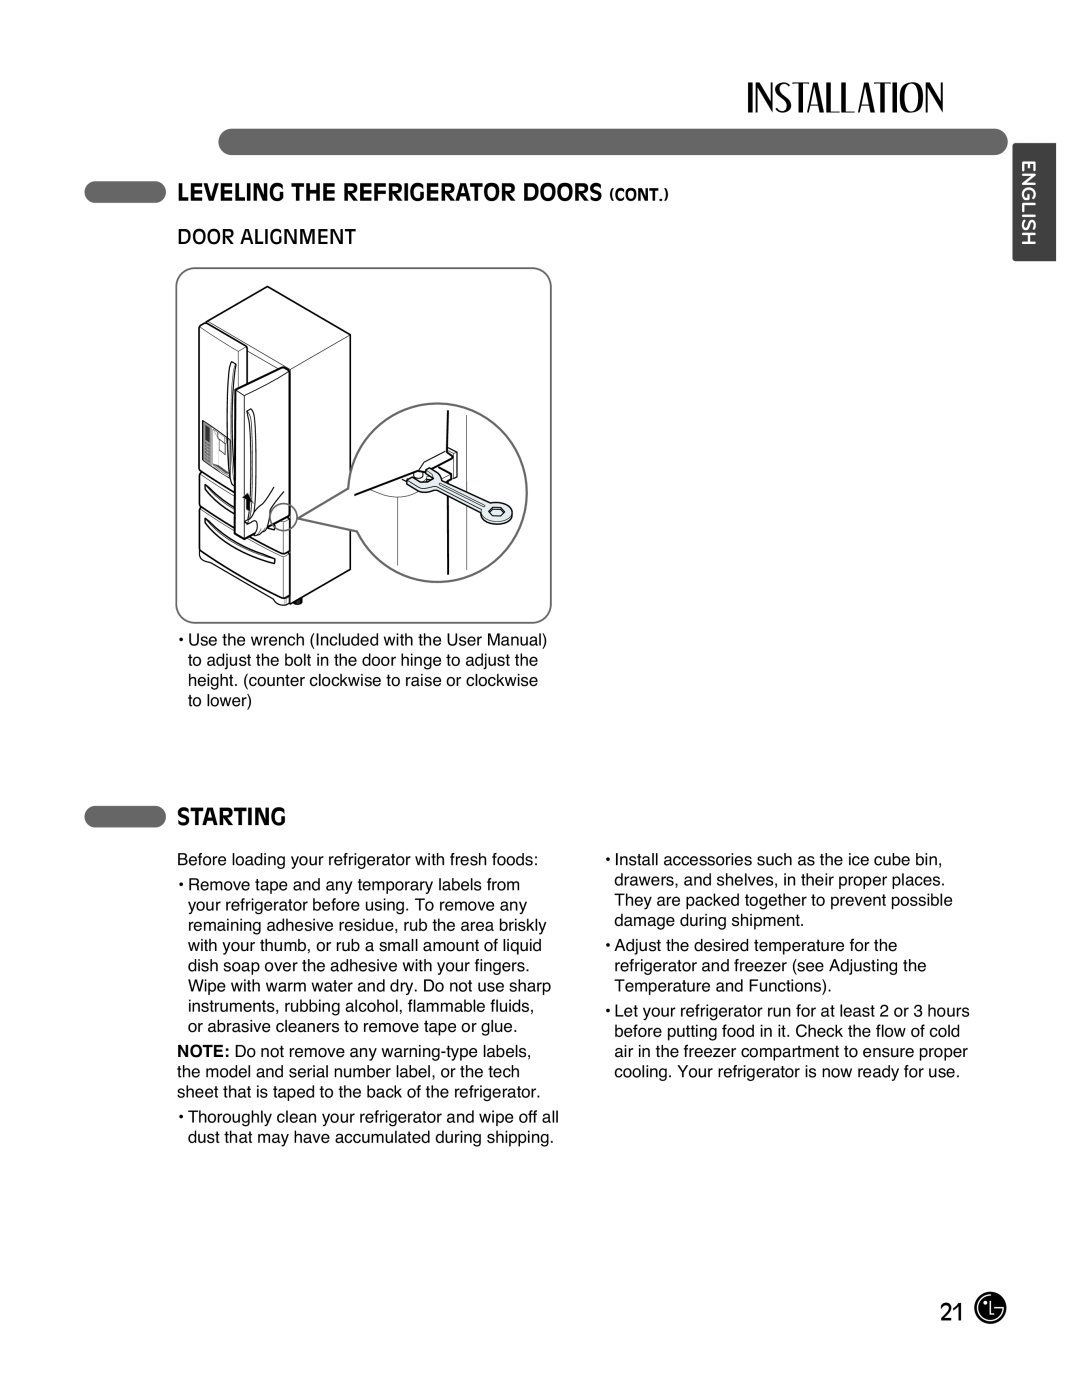 LG Electronics LMX25988ST owner manual Leveling The Refrigerator Doors Cont, Starting, Door Alignment, English 